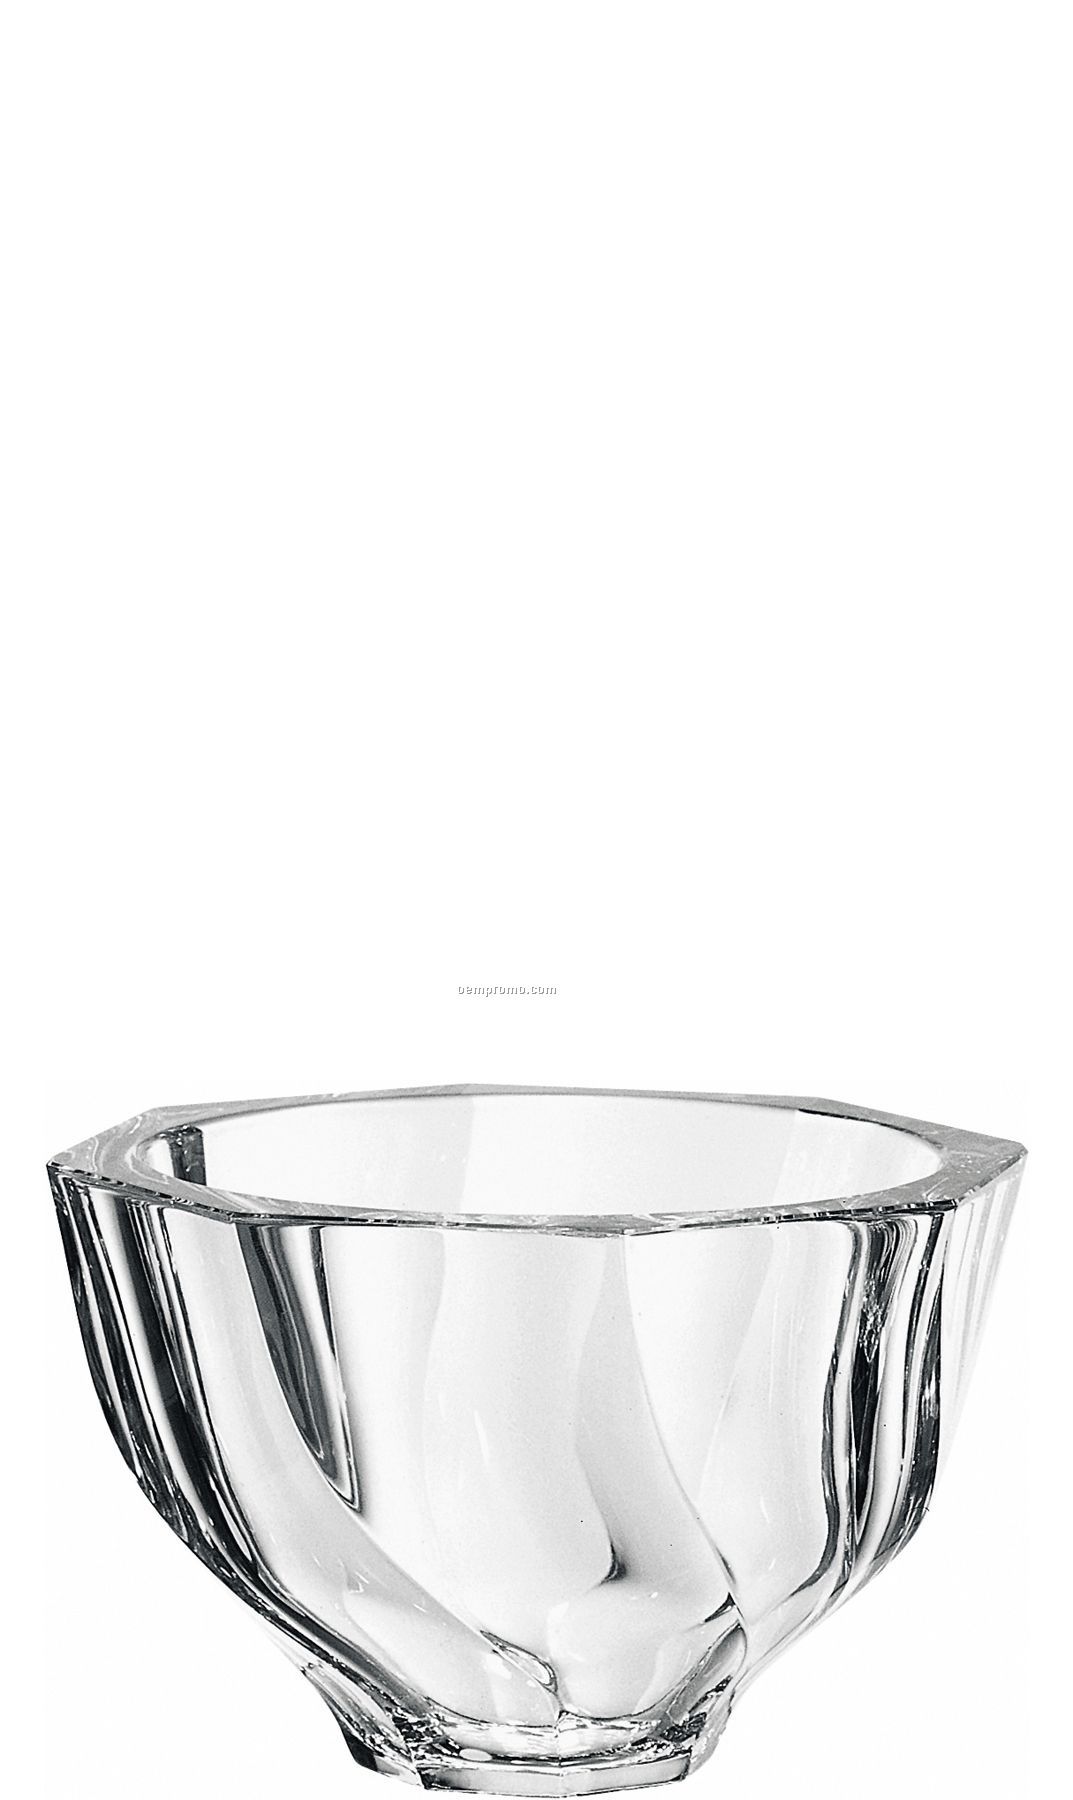 Residence Crystal Biased Cut Bowl By Olle Alberius (3 1/8"X4 3/4")